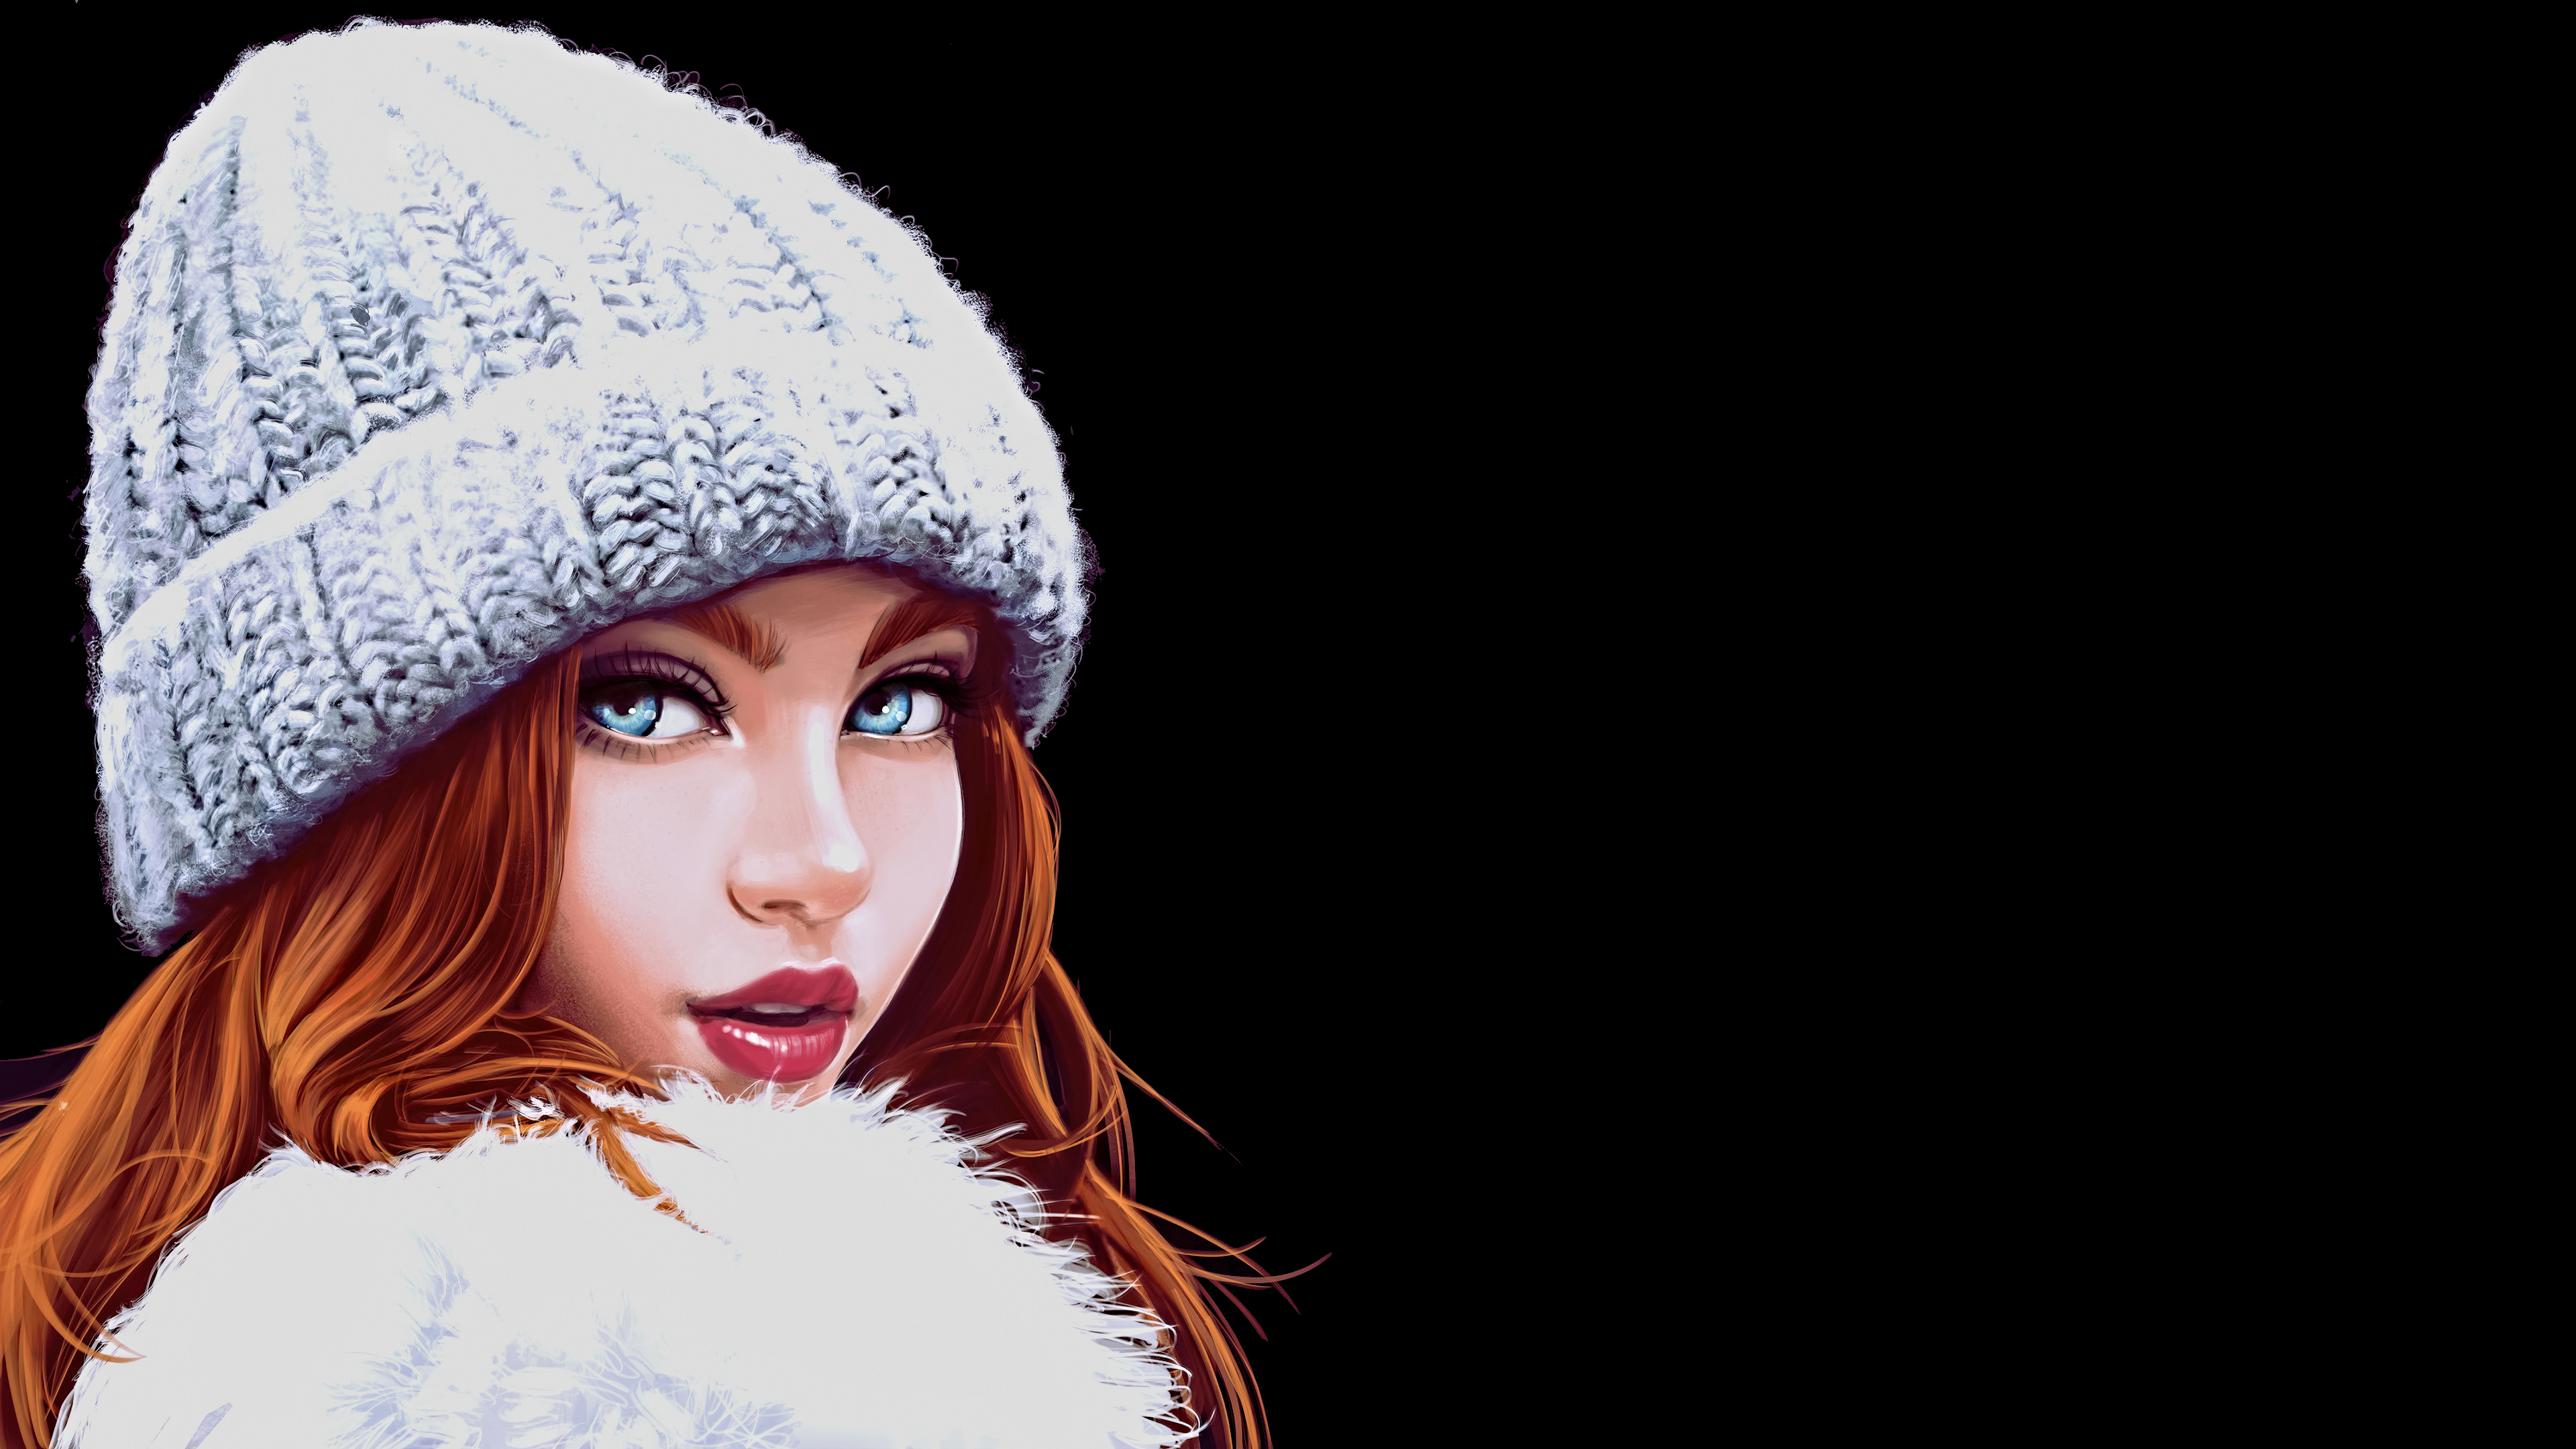 General 3840x2160 painting digital art concept art artwork fantasy art fan art CGI fantasy girl women realistic portrait face long hair simple background looking at viewer digital painting dark photoshopped hair in face red lipstick eyes blue eyes